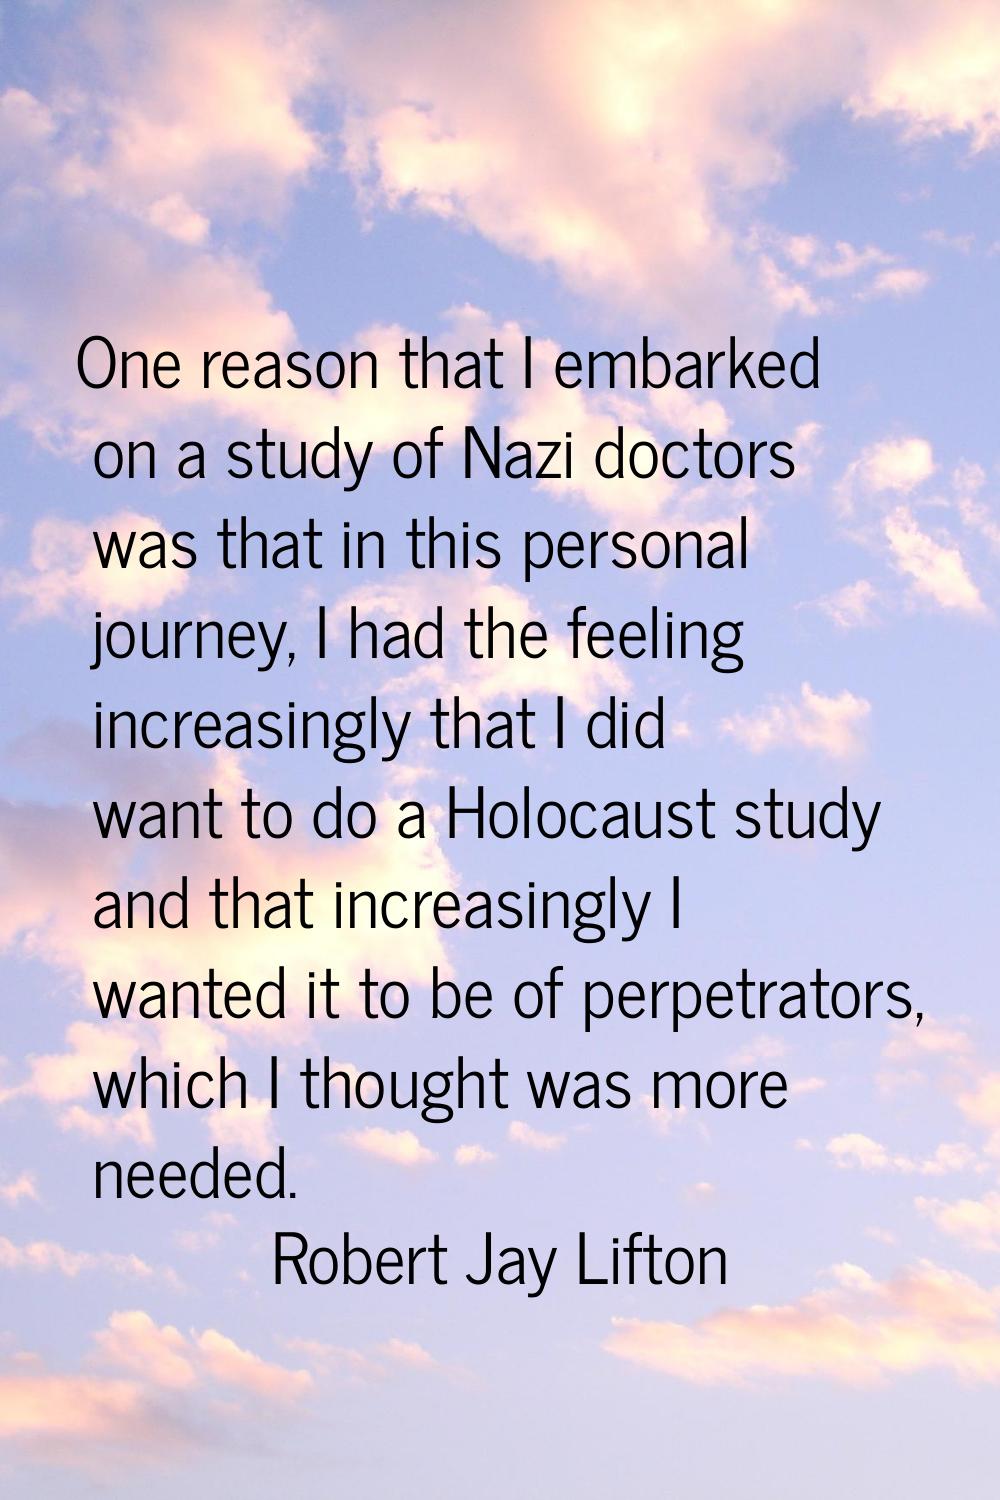 One reason that I embarked on a study of Nazi doctors was that in this personal journey, I had the 